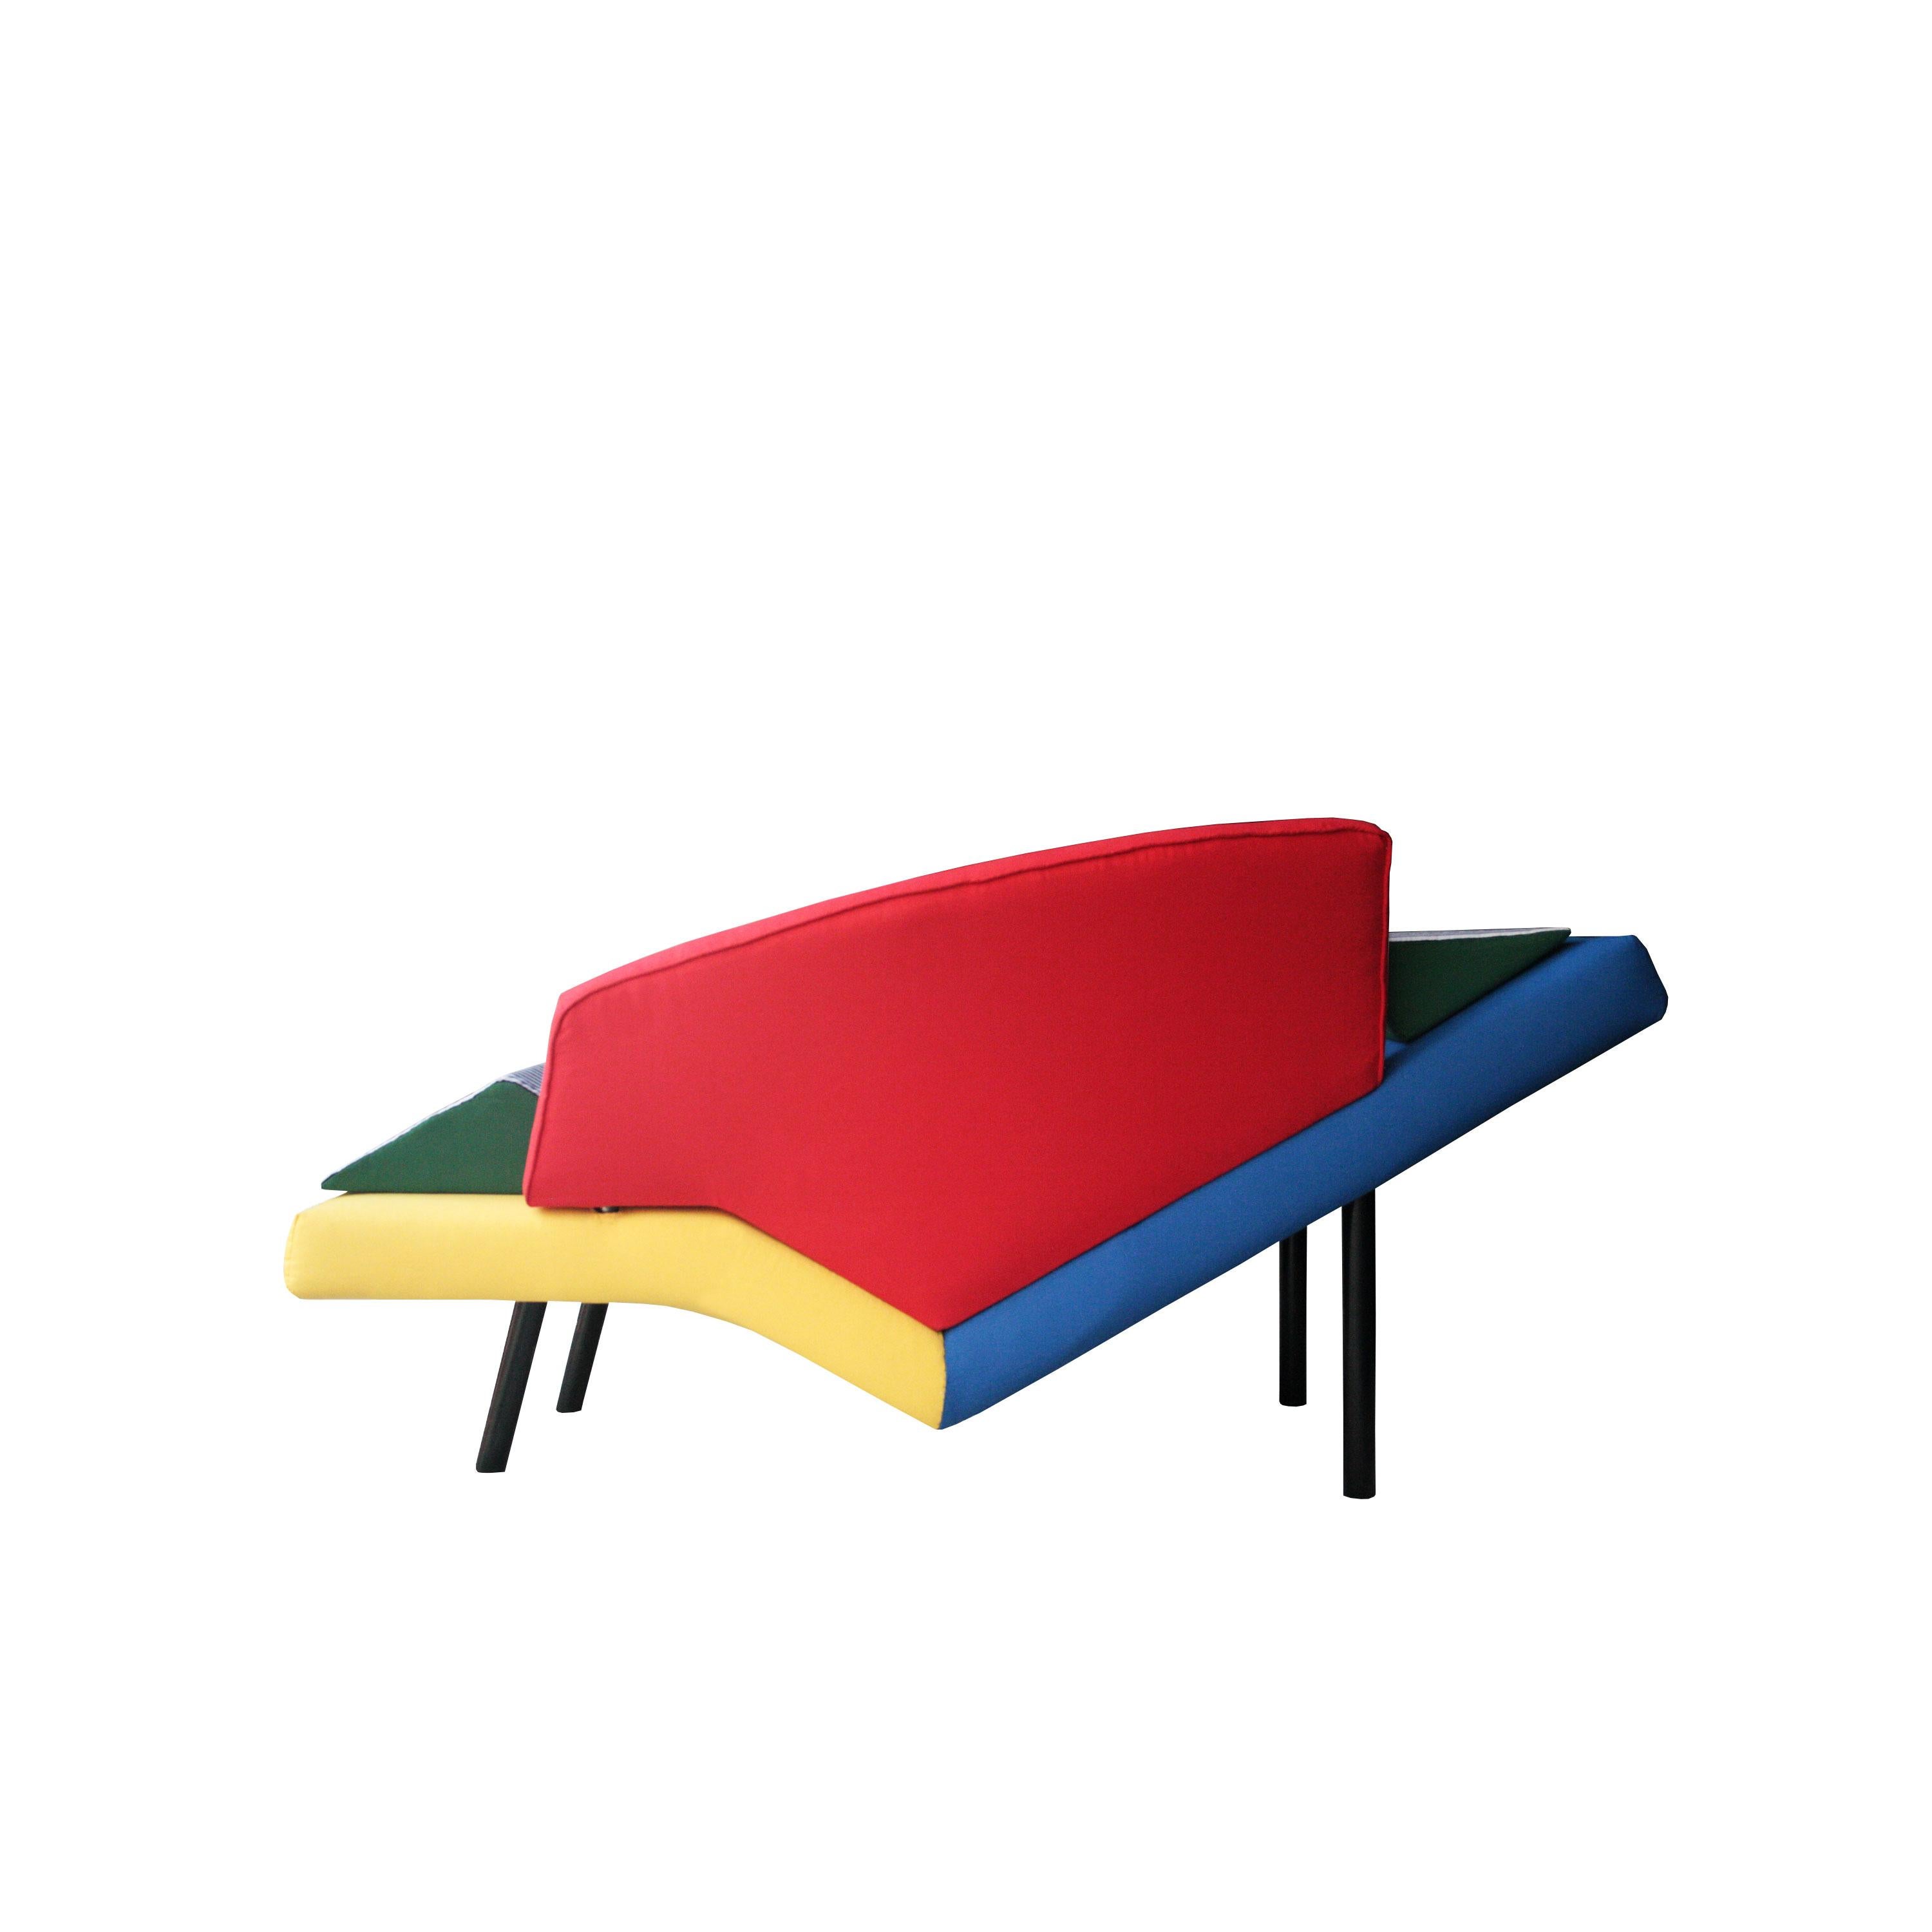 Late 20th Century After Memphis Geometric Blue Yellow Red Green Metal Italian Chaise Longue, 1980